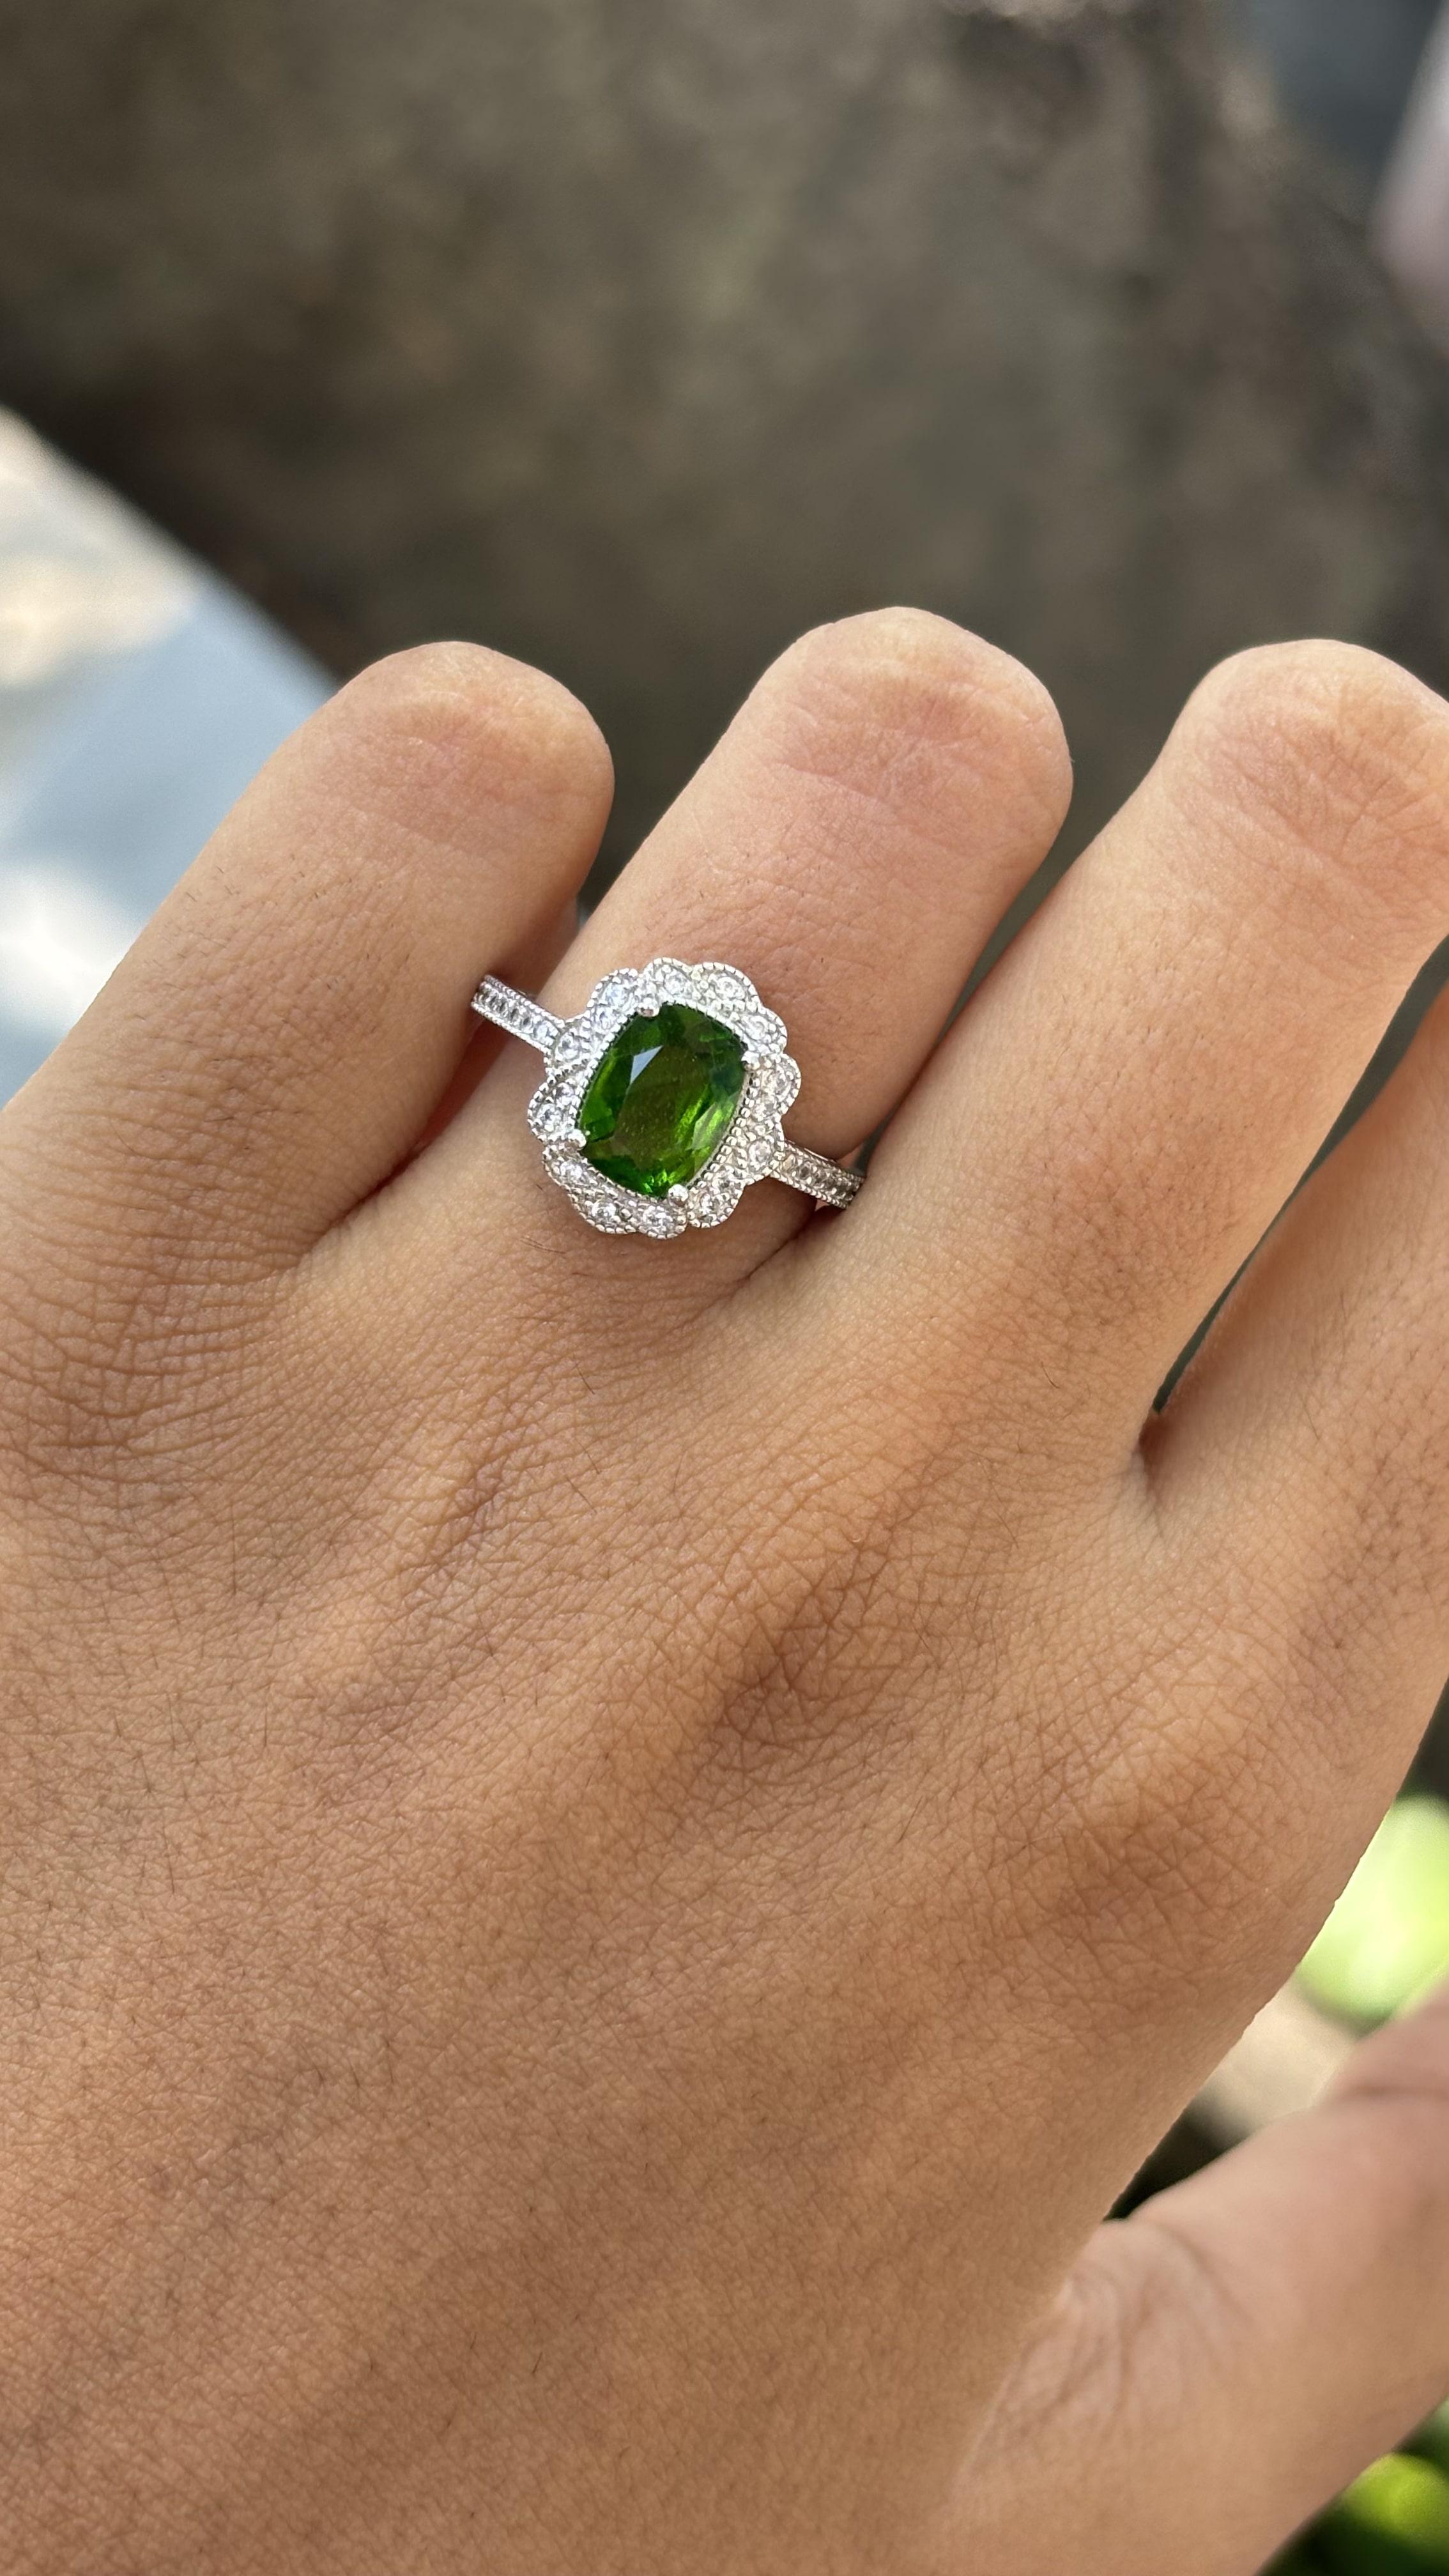 Antique circa 1900s Diopside & CZ Ring in Silver 2